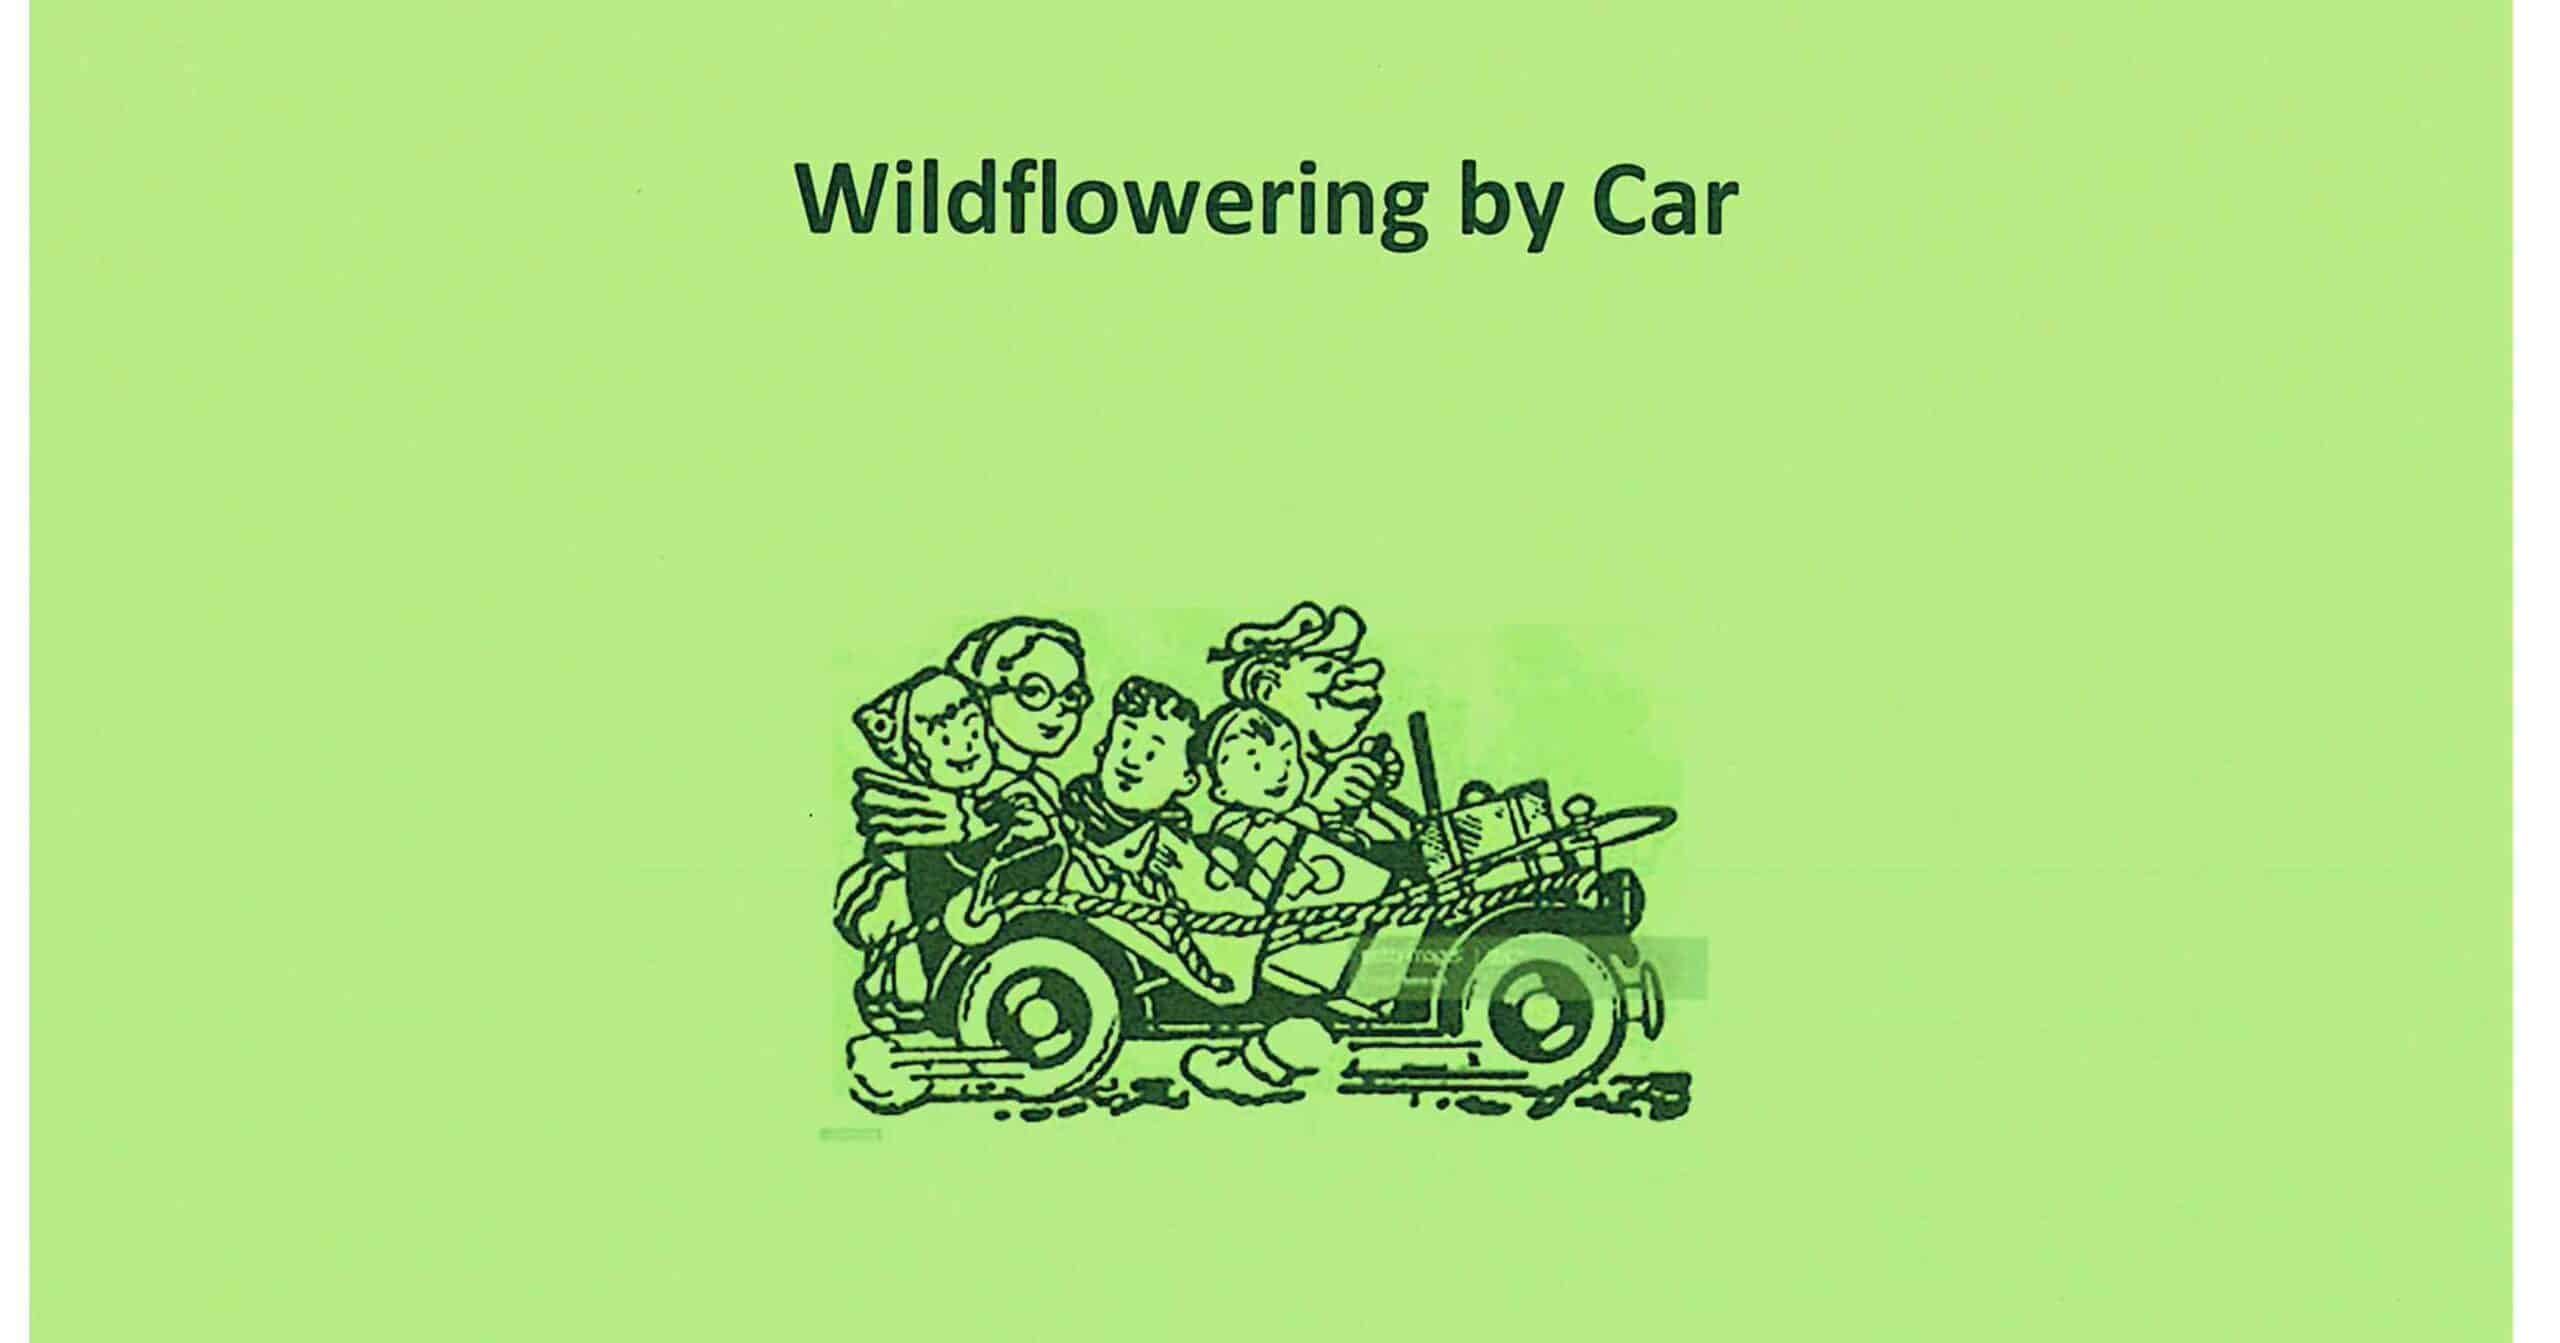 Wildflowering by Car words on green background with a picture of a car with 5 passengers